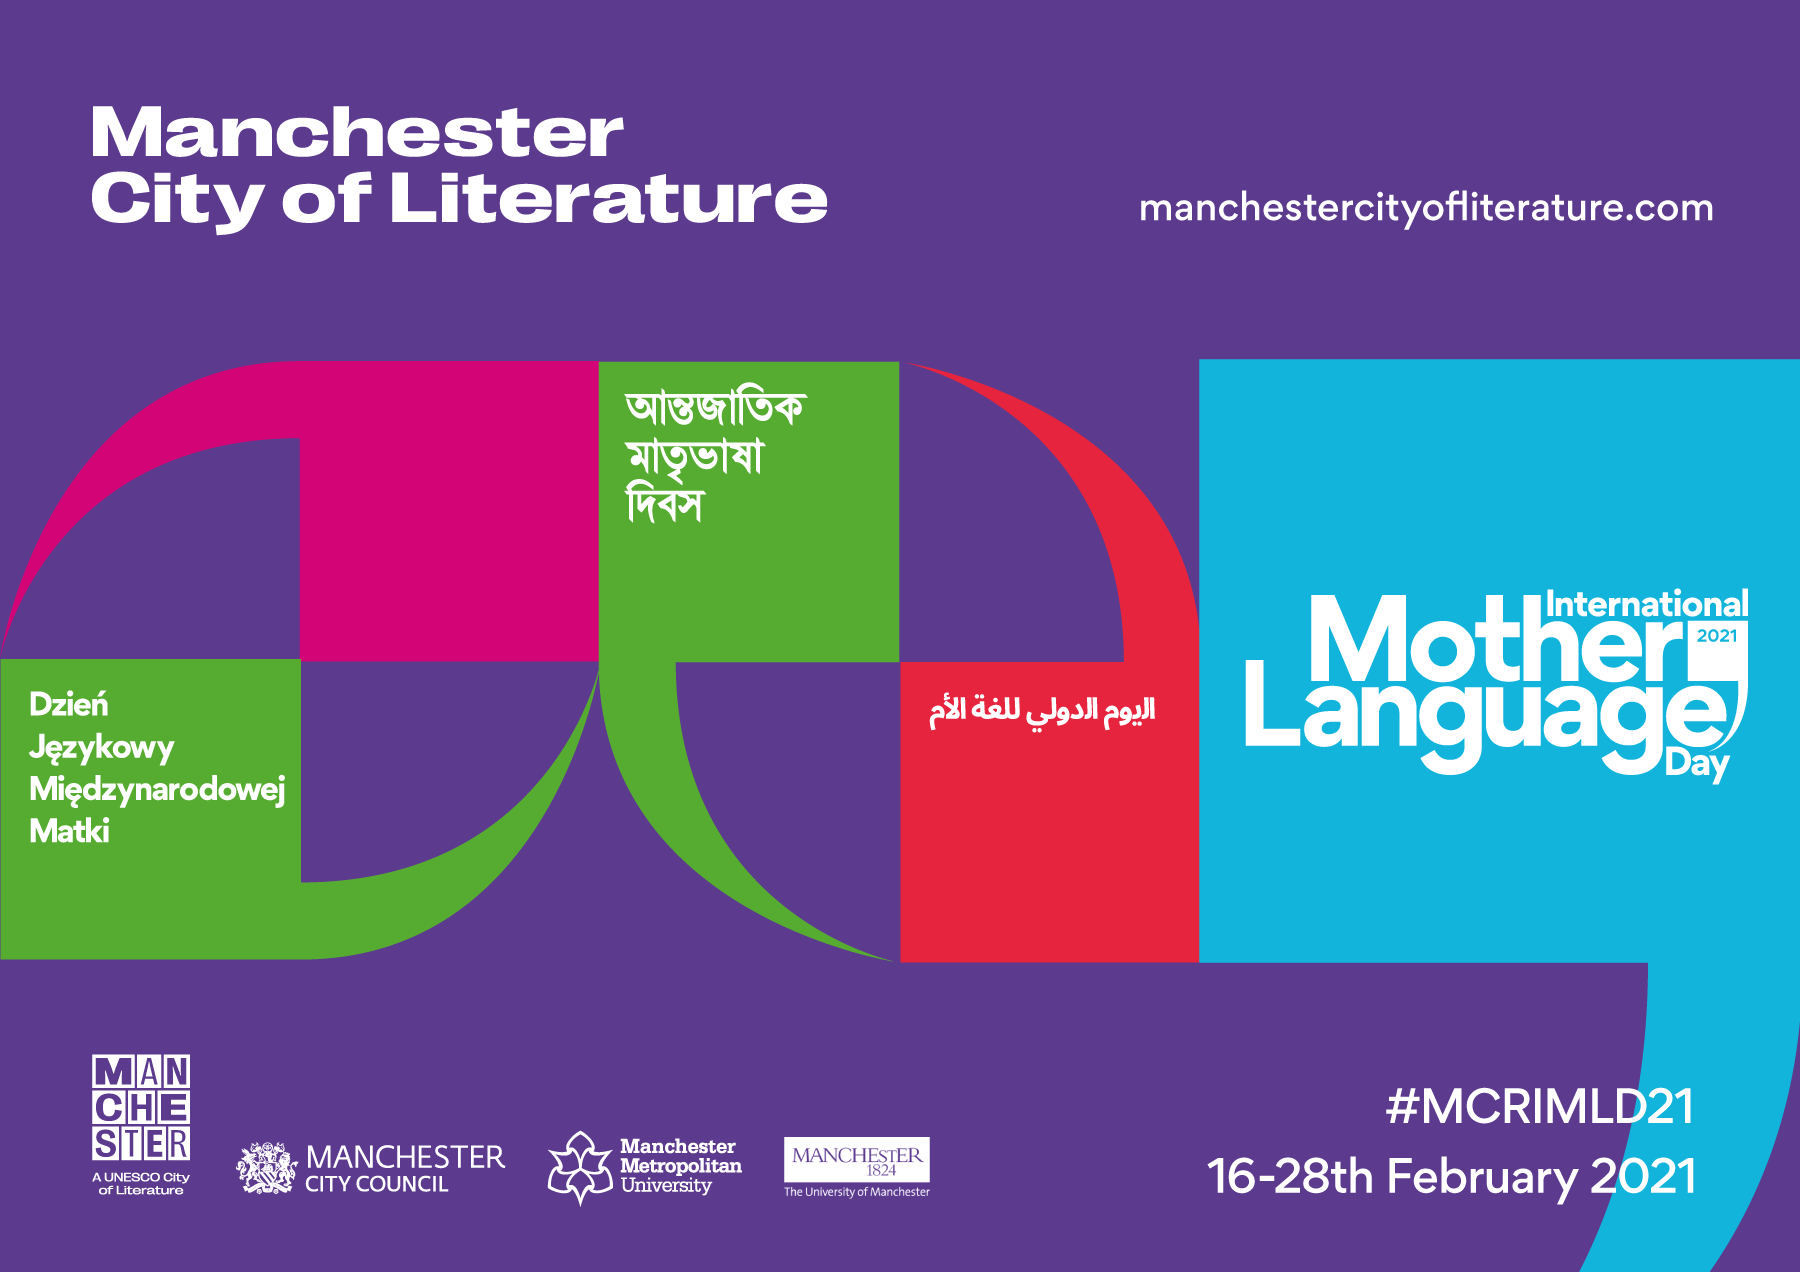 Manchester Metropolitan University is involved in numerous events to mark International Mother Language Day